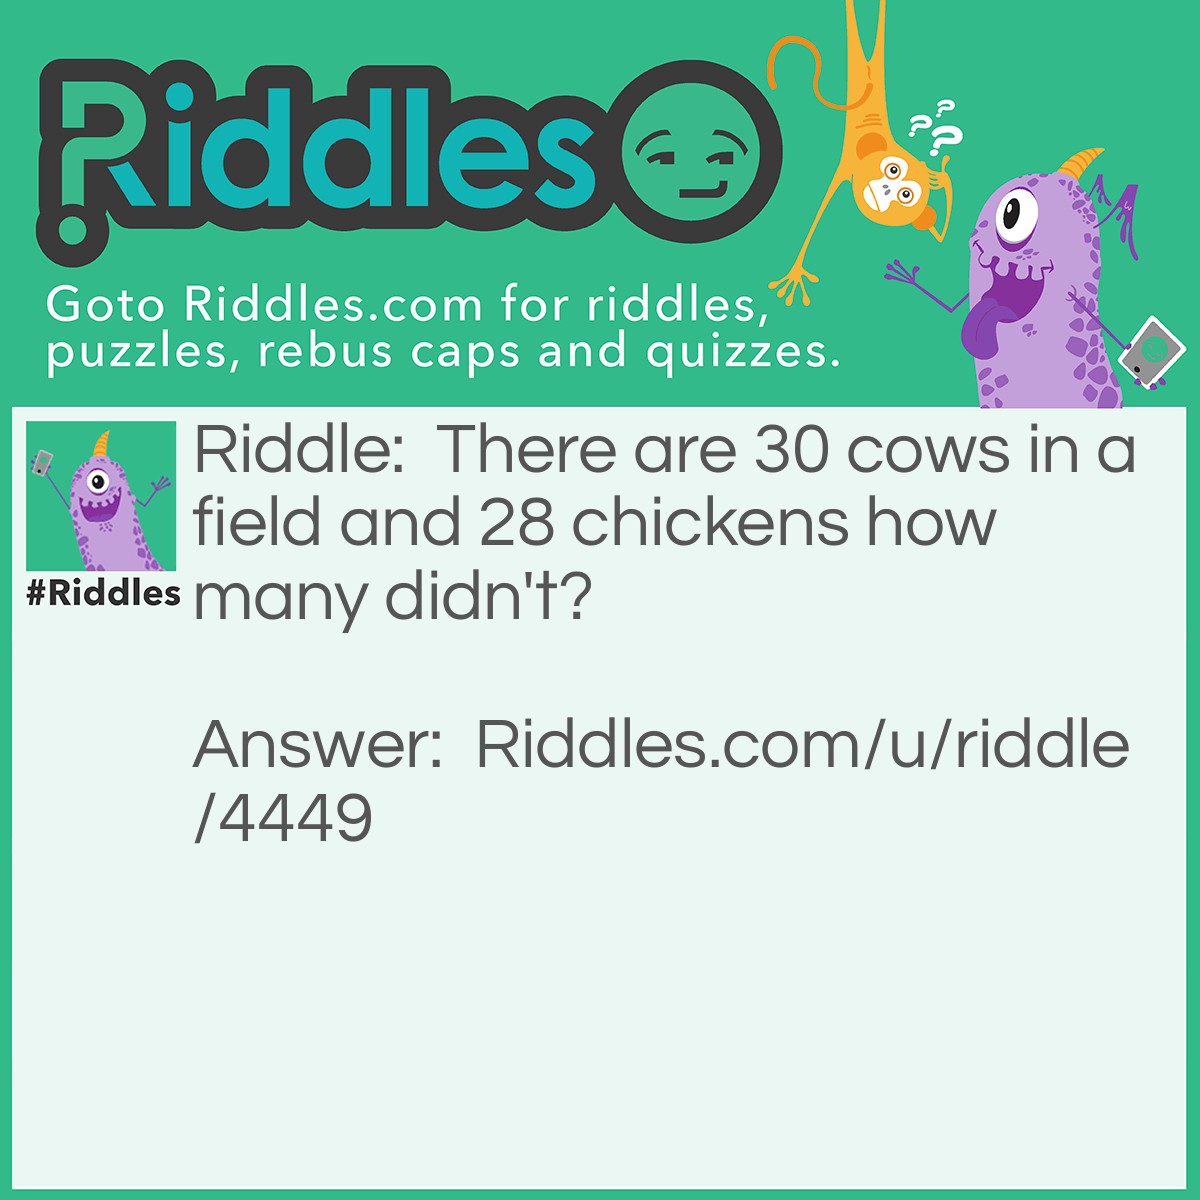 Riddle: There are 30 cows in a field and 28 chickens how many didn't? Answer: 10, because 20 cows ate chickens, so if you subtract 20 from 30 you get 10!